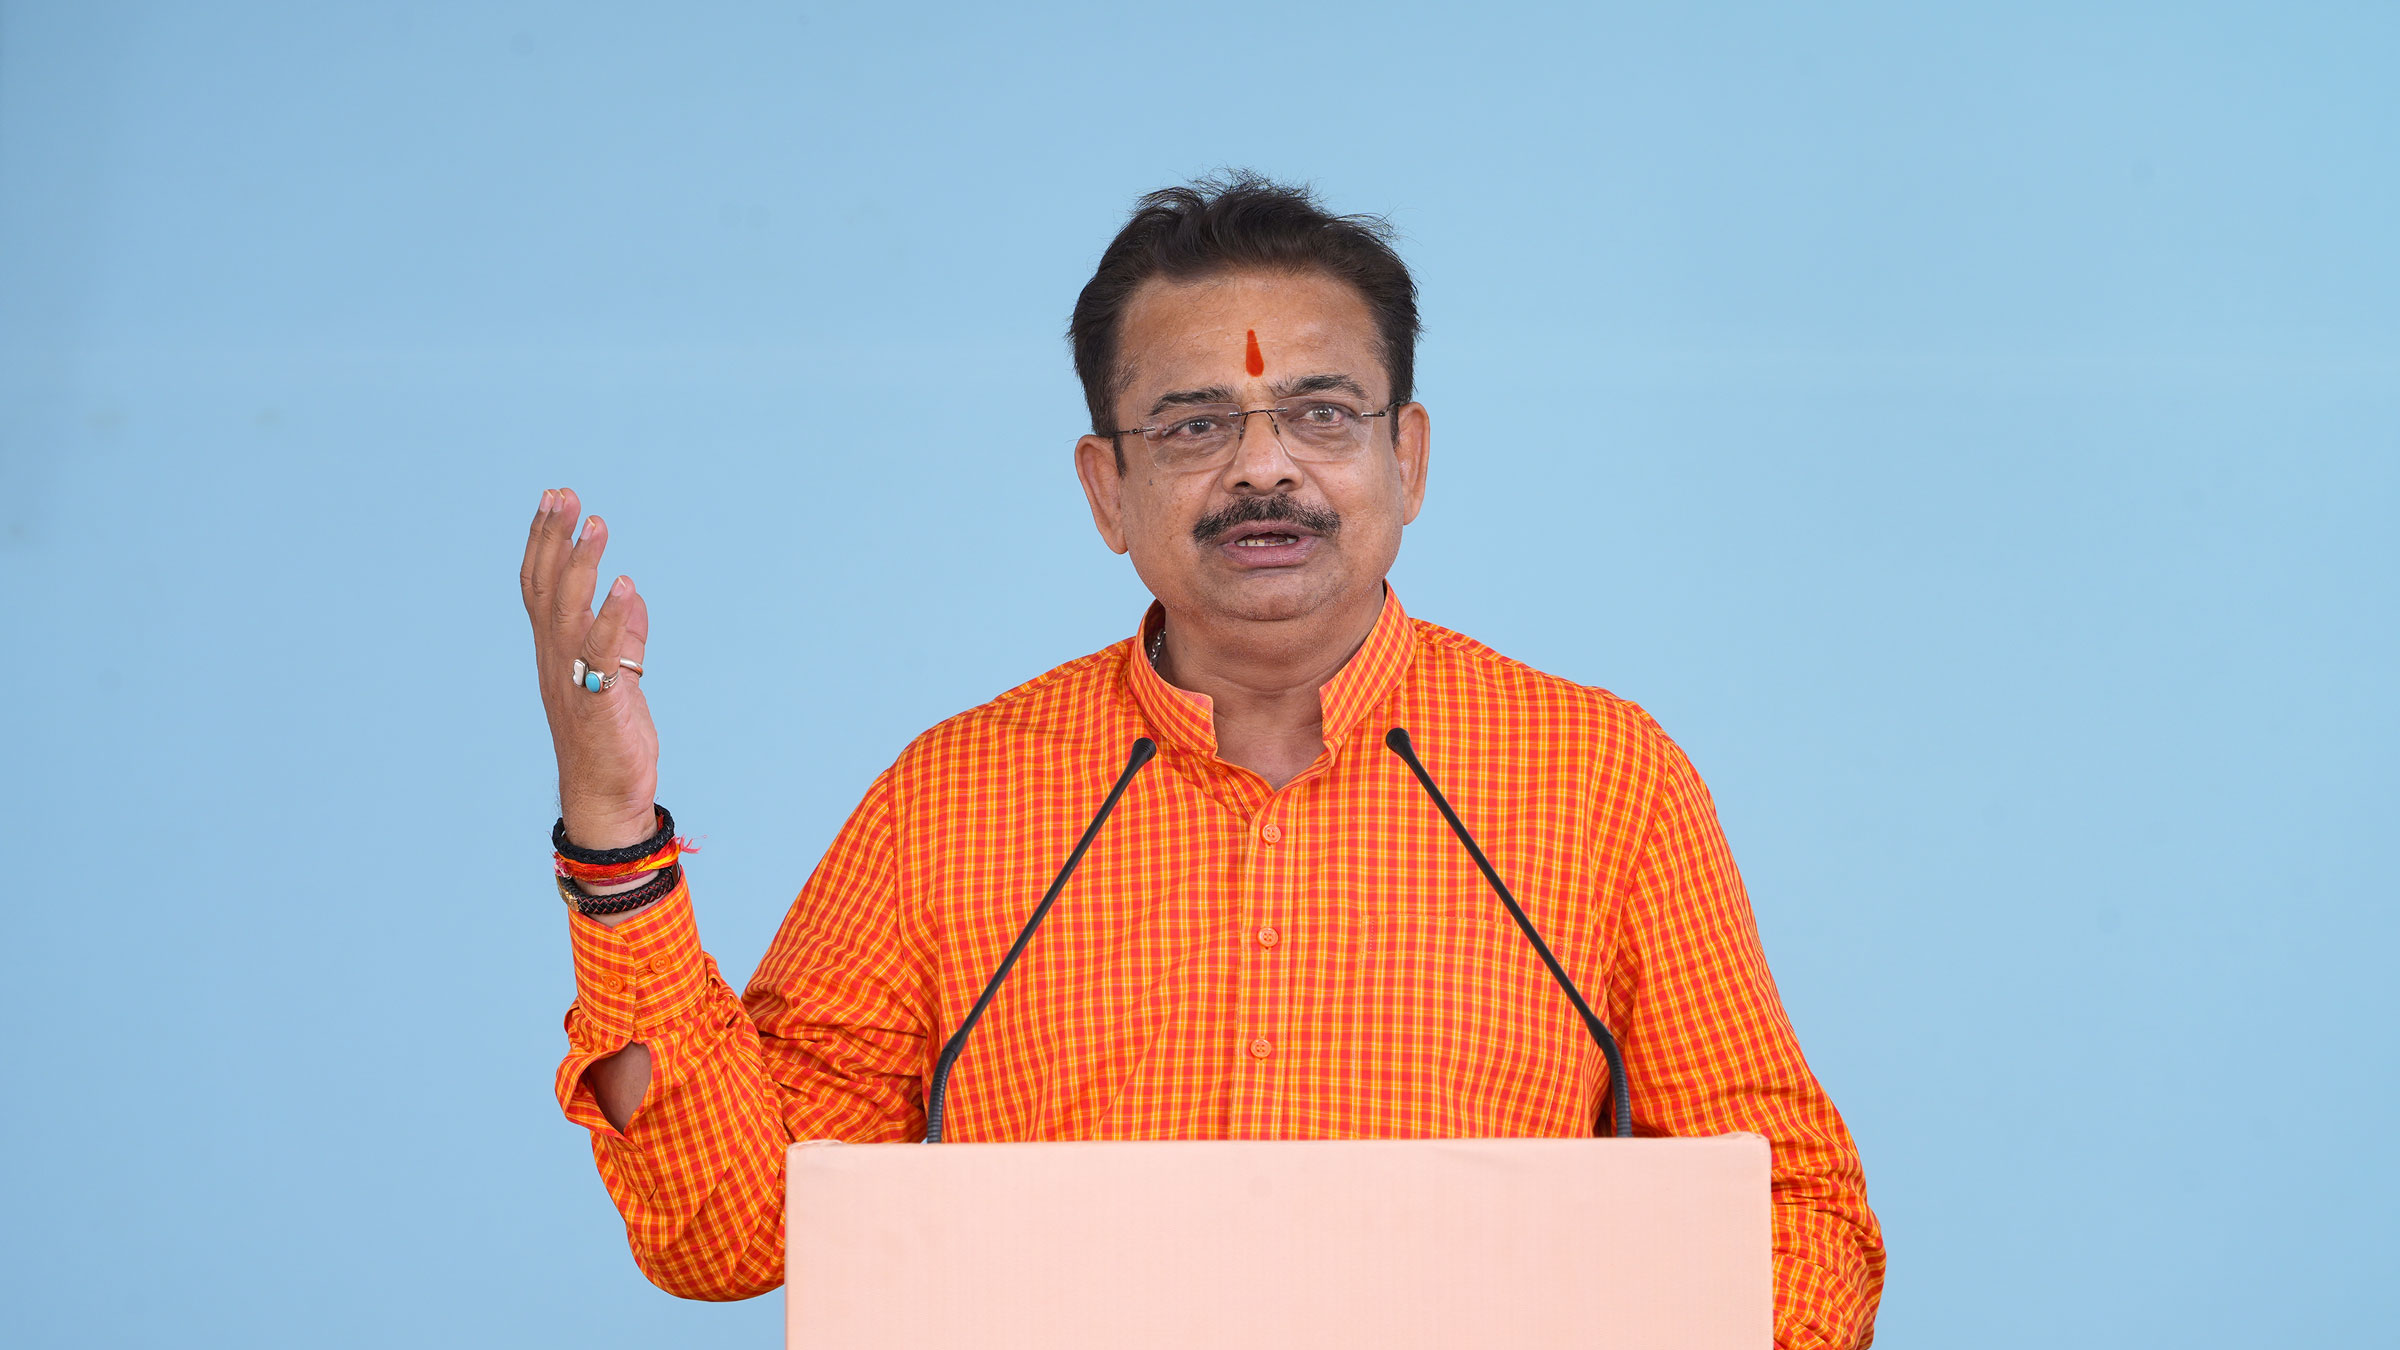 While speaking on the ‘Management of Mangal Graha Temple in Maharashtra, Mr Digambar Mahale (President, Shri Mangal Graha Seva Sanstha, Amalner, Jalgaon, Maharashtra) said - When entering temples, we should wear clothes as per our culture.